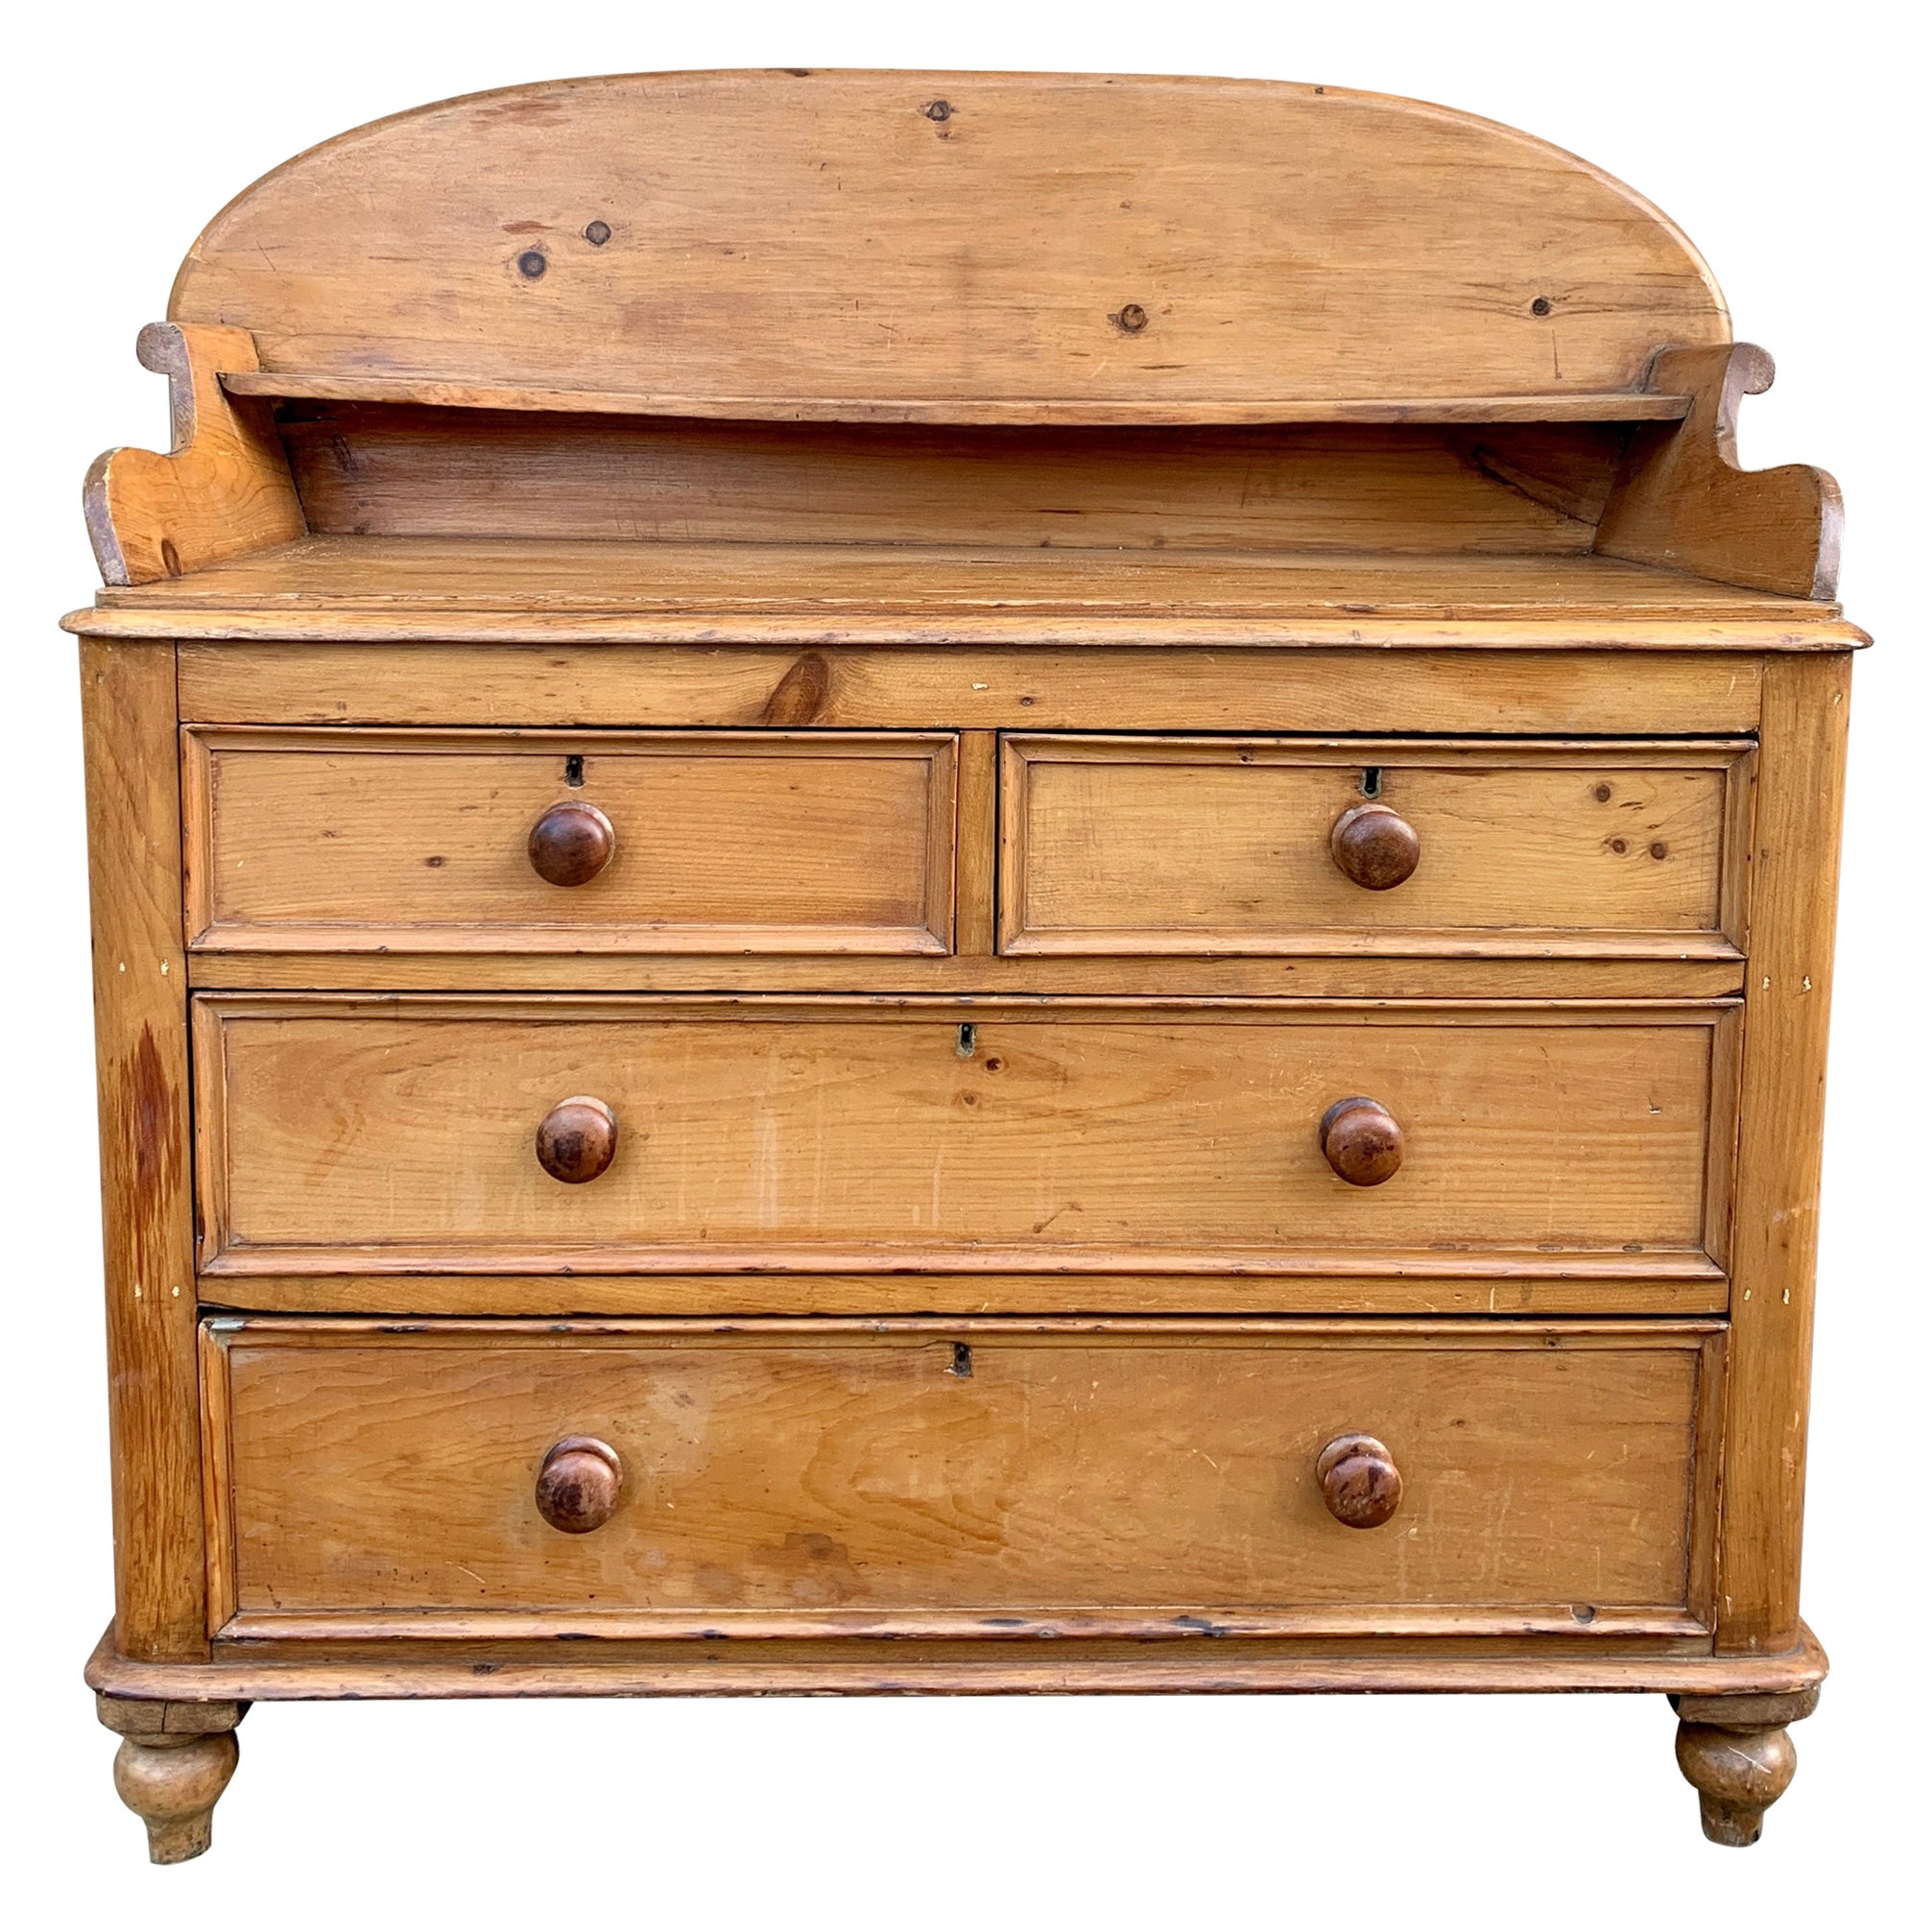 Antique Scandinavian Pine Chest of Drawers or Server, Early 19th Century